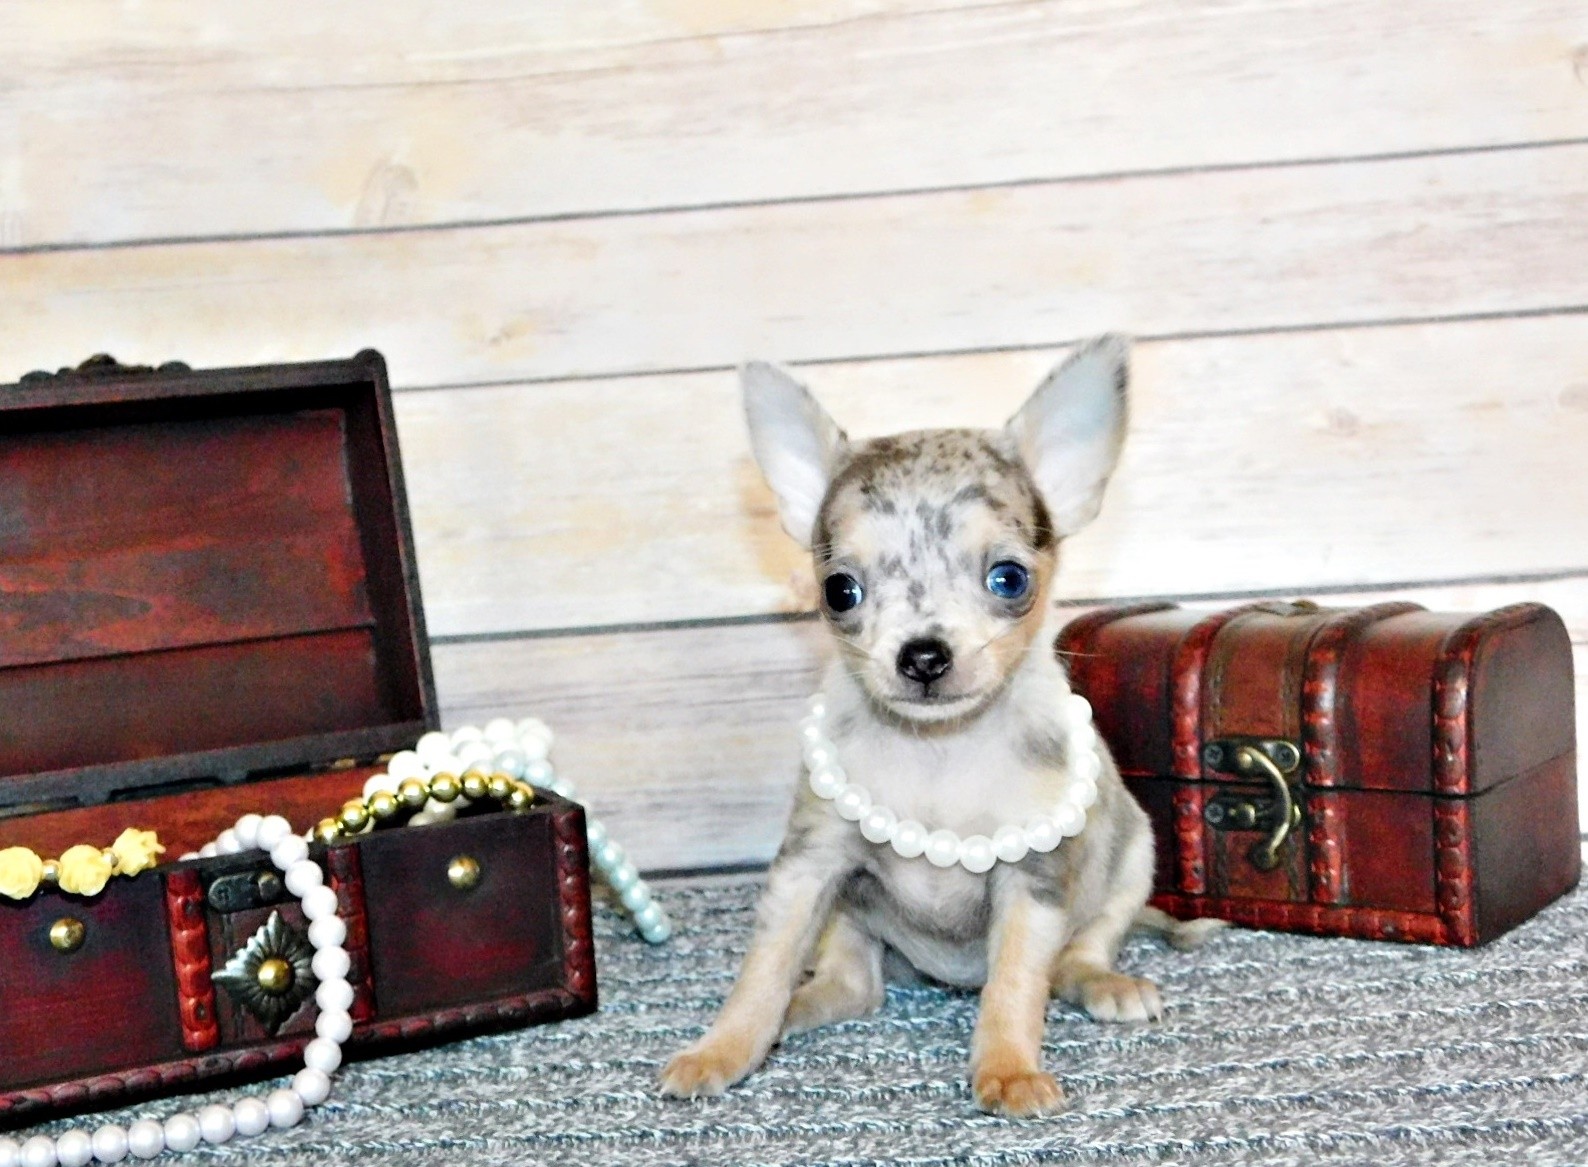 Tiny blue merle Chihuahua puppy wearing a pearl necklace sitting near a treasure chest.  Long haired Chihuahua puppies for sale in Arkansas